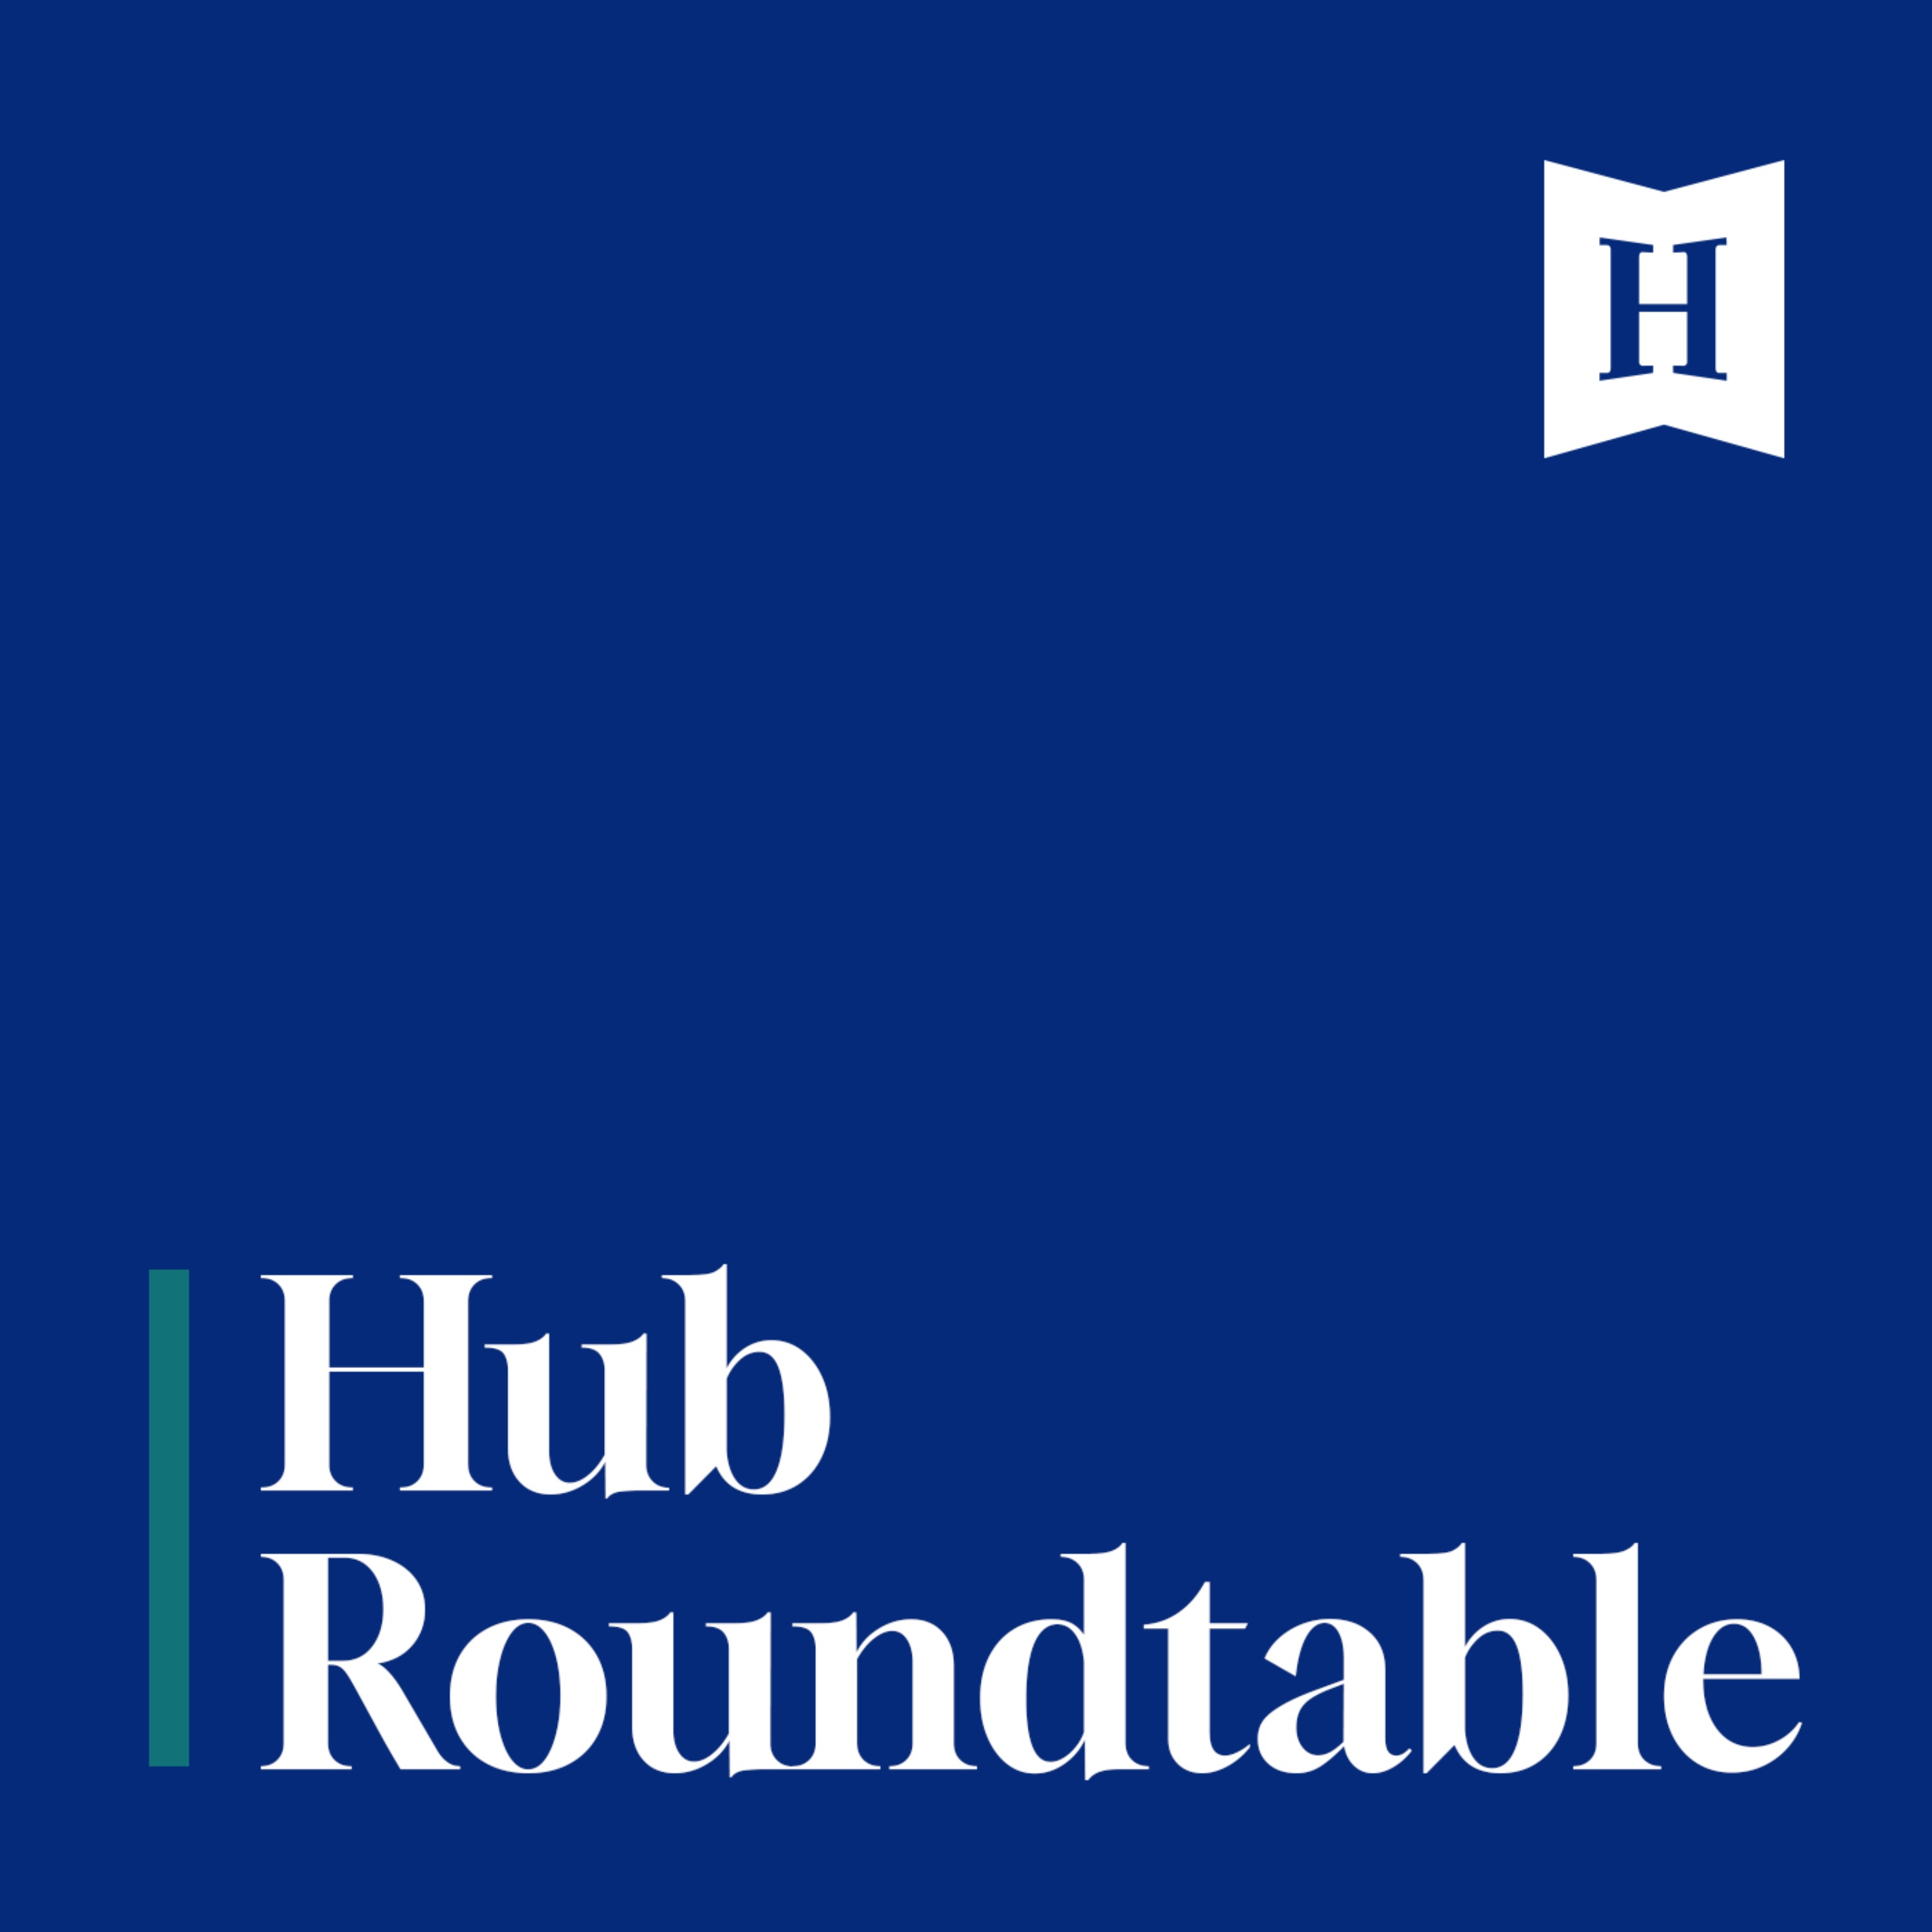 Hub Roundtable: Private news media are becoming wards of the state